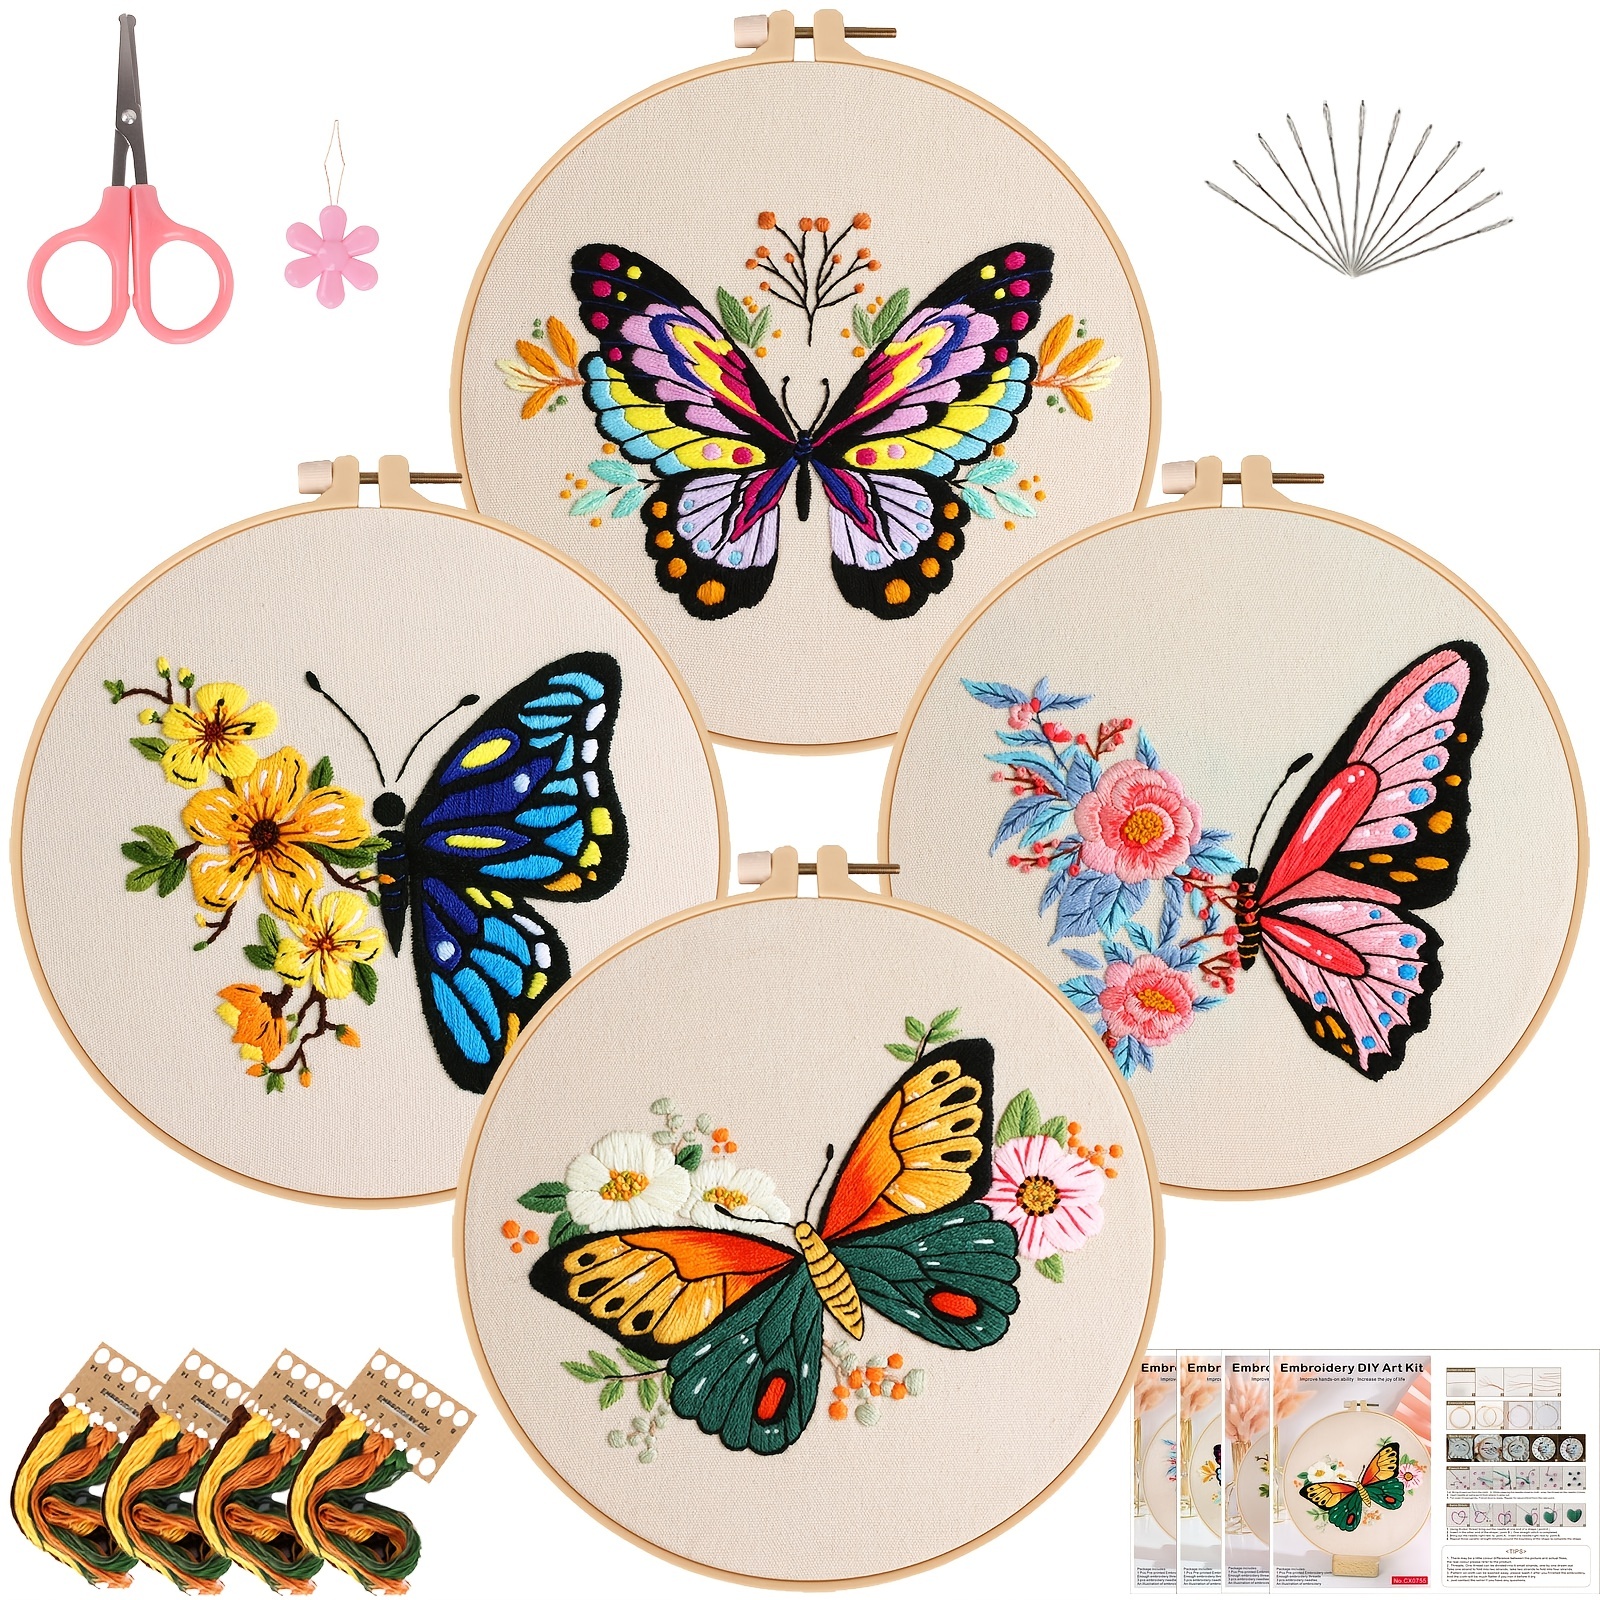 4Pcs Embroidery Kit with Butterflies & Flowers: Lowest Price, Free Shipping